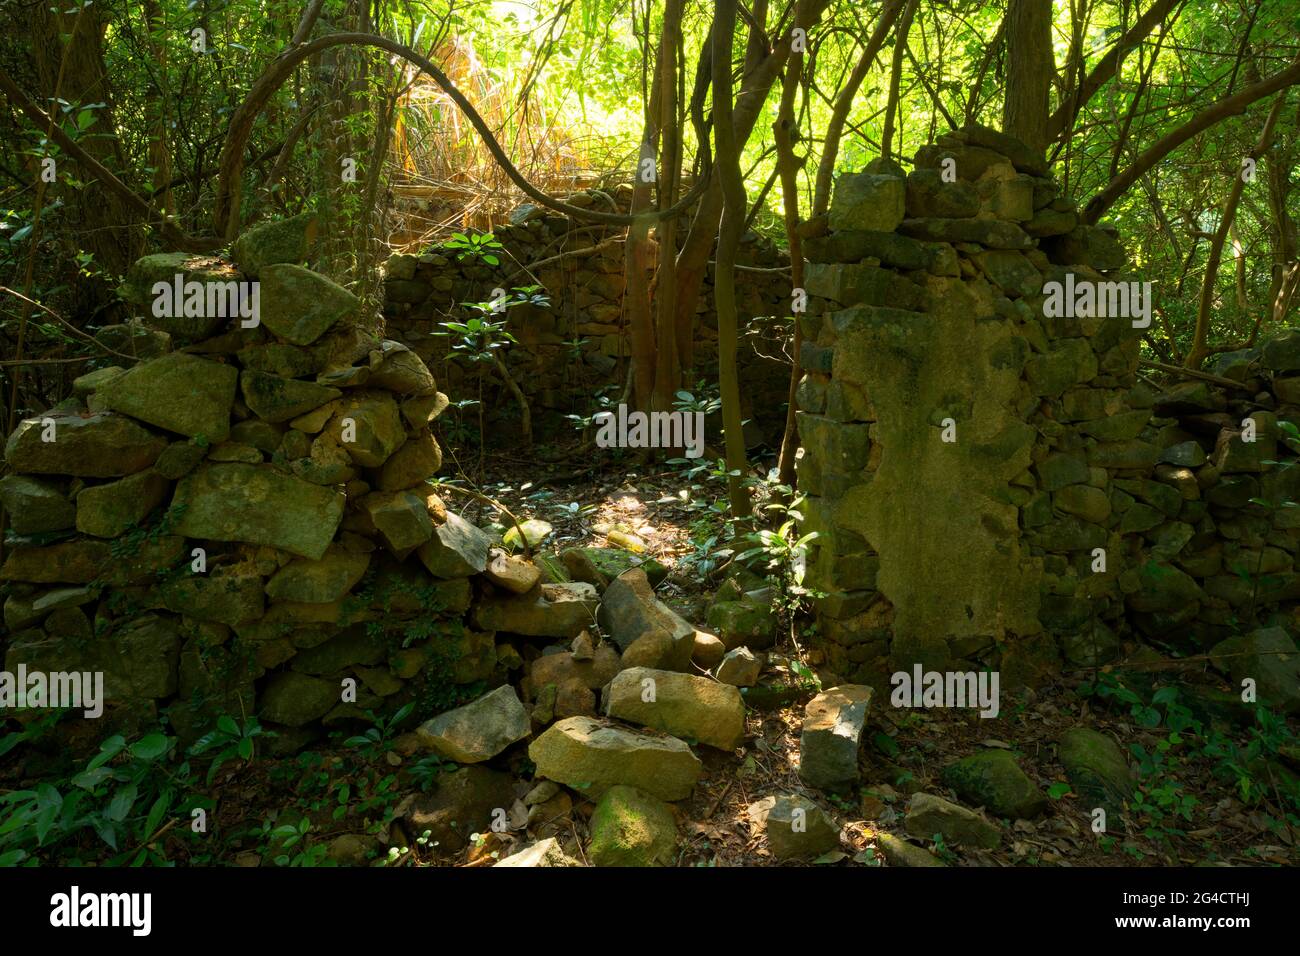 The ruins of an abandoned village house on Tap Mun (Grass Island), New Territories, Hong Kong Stock Photo